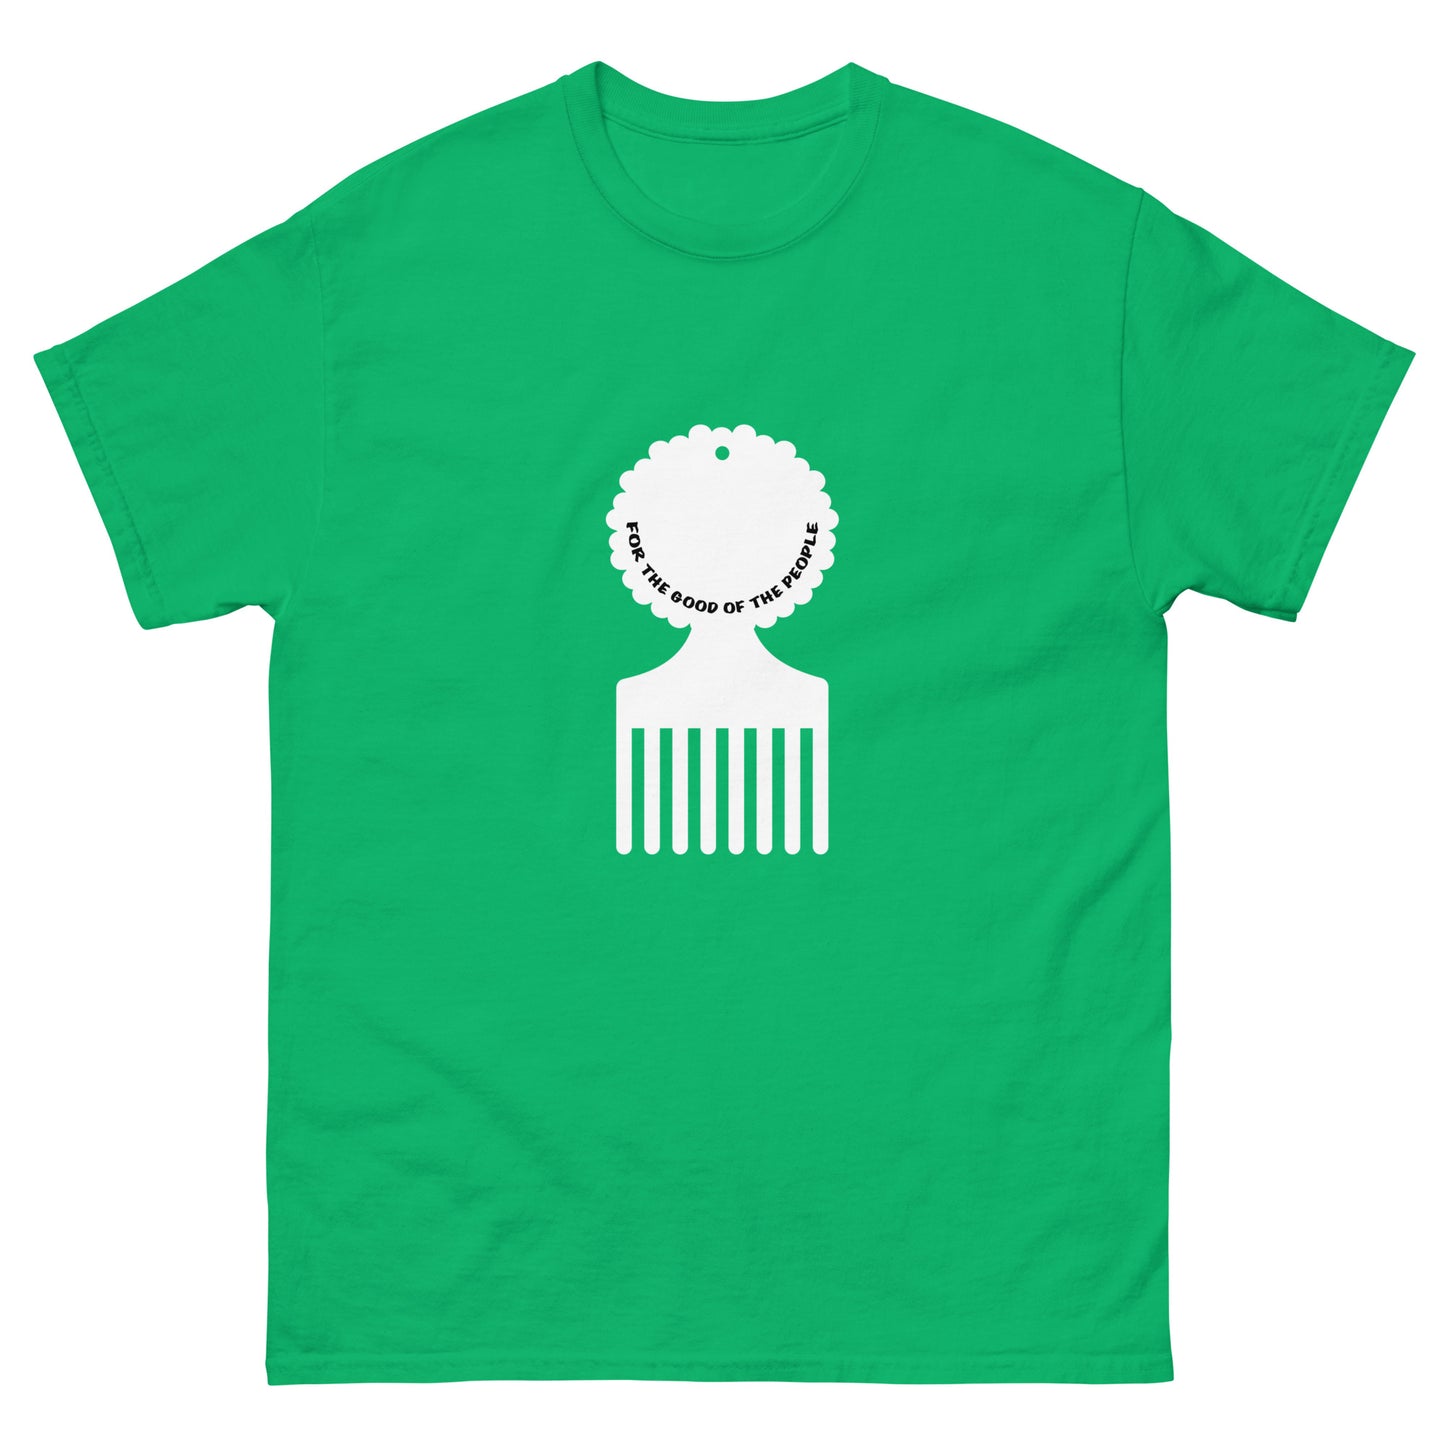 Men's green tee with white afro pick in the center of shirt, with for the good of the people in white inside the afro pick's handle.